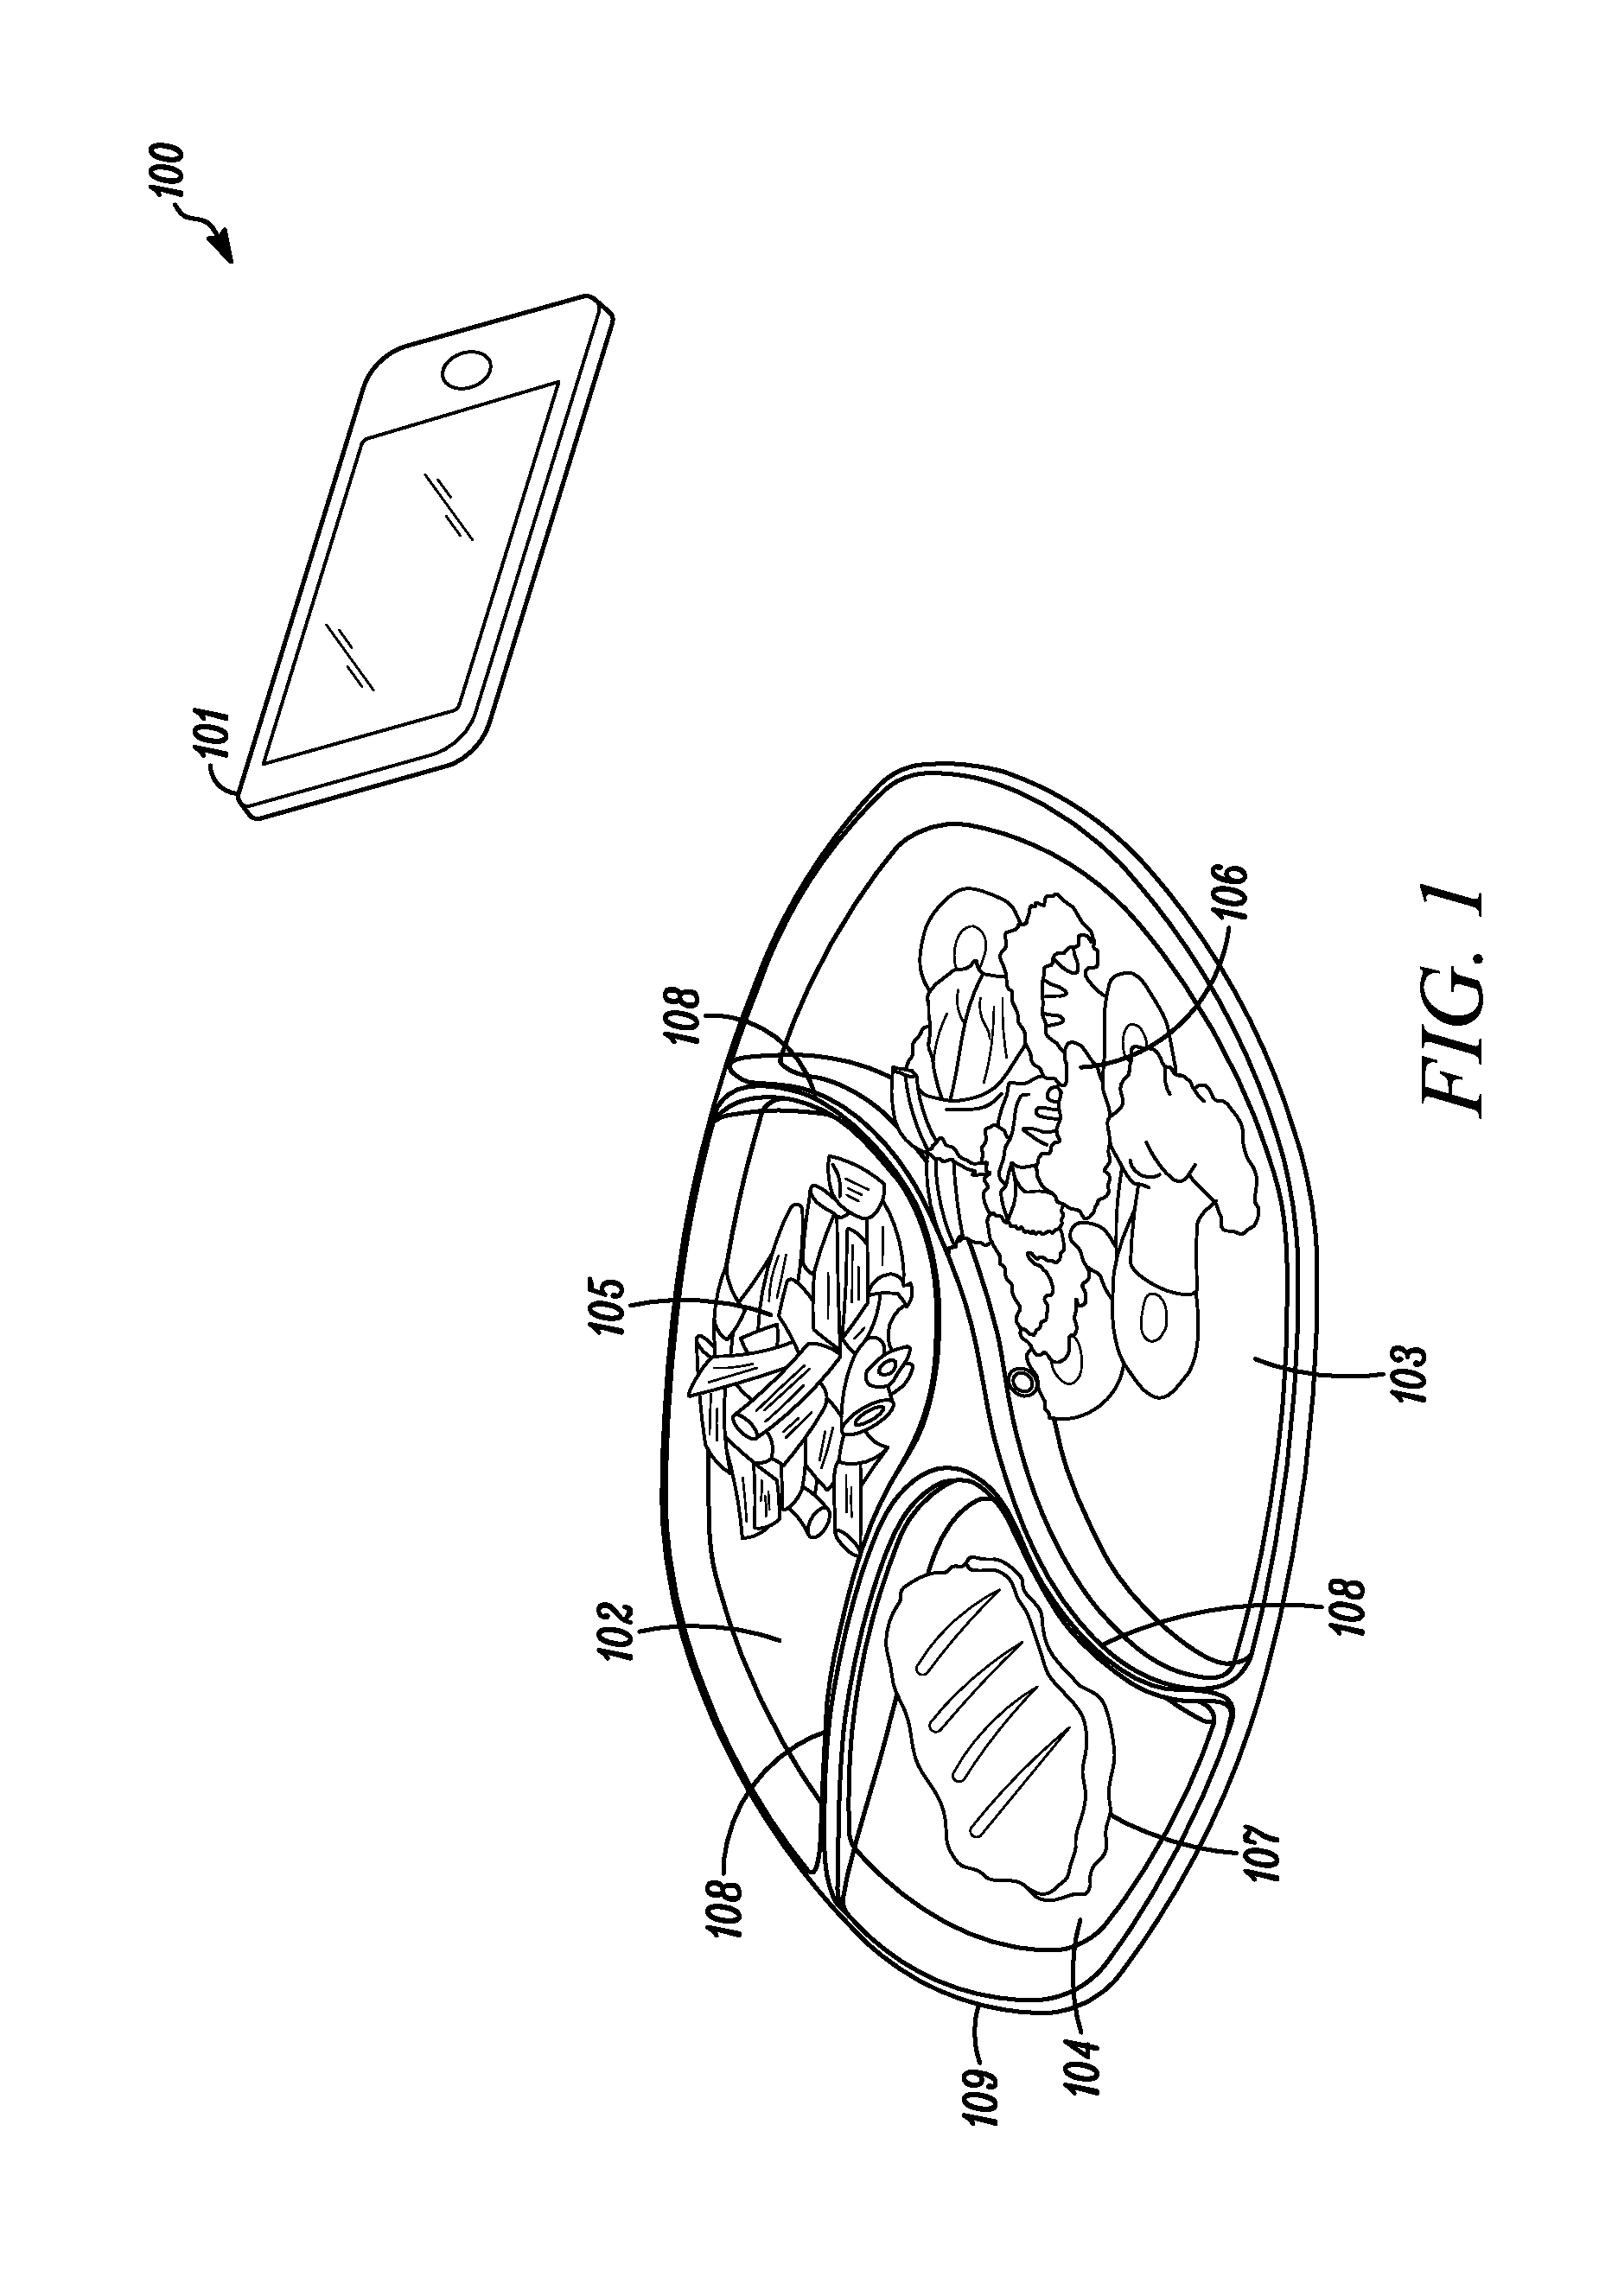 System and method for nutrition analysis using food image recognition